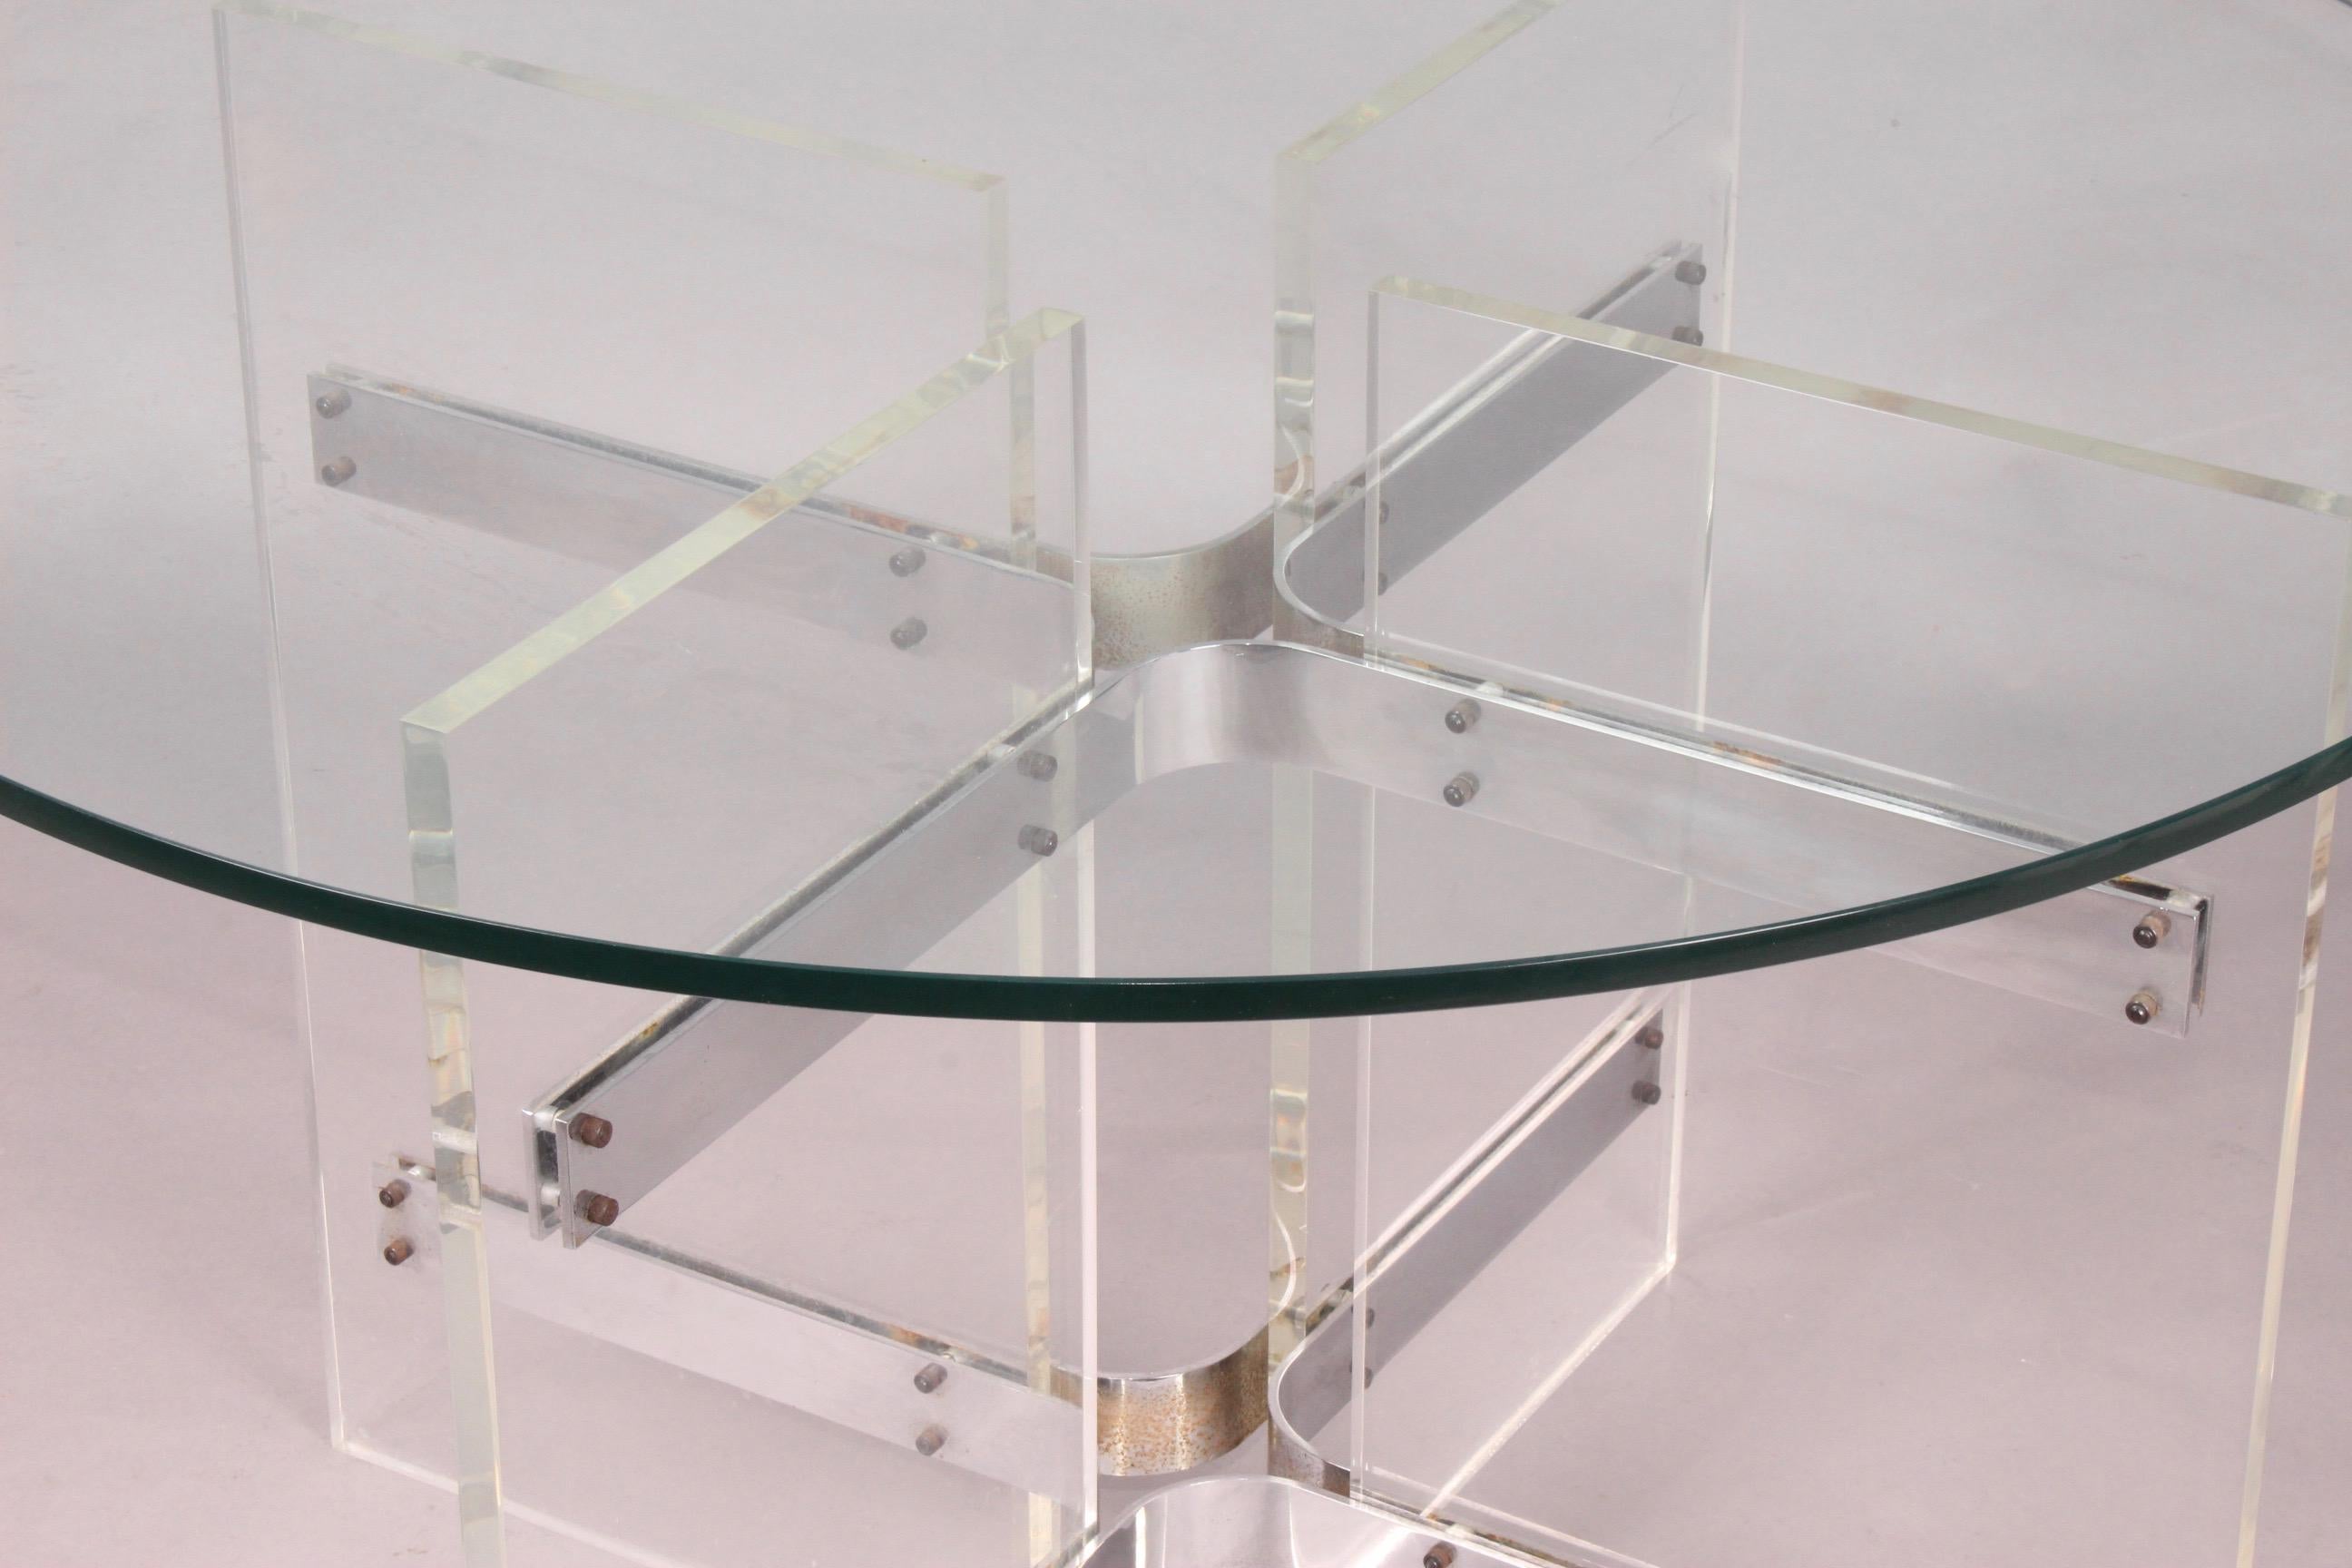 European Plexiglass and Glass Guerdon or Dinning Table for 4 People